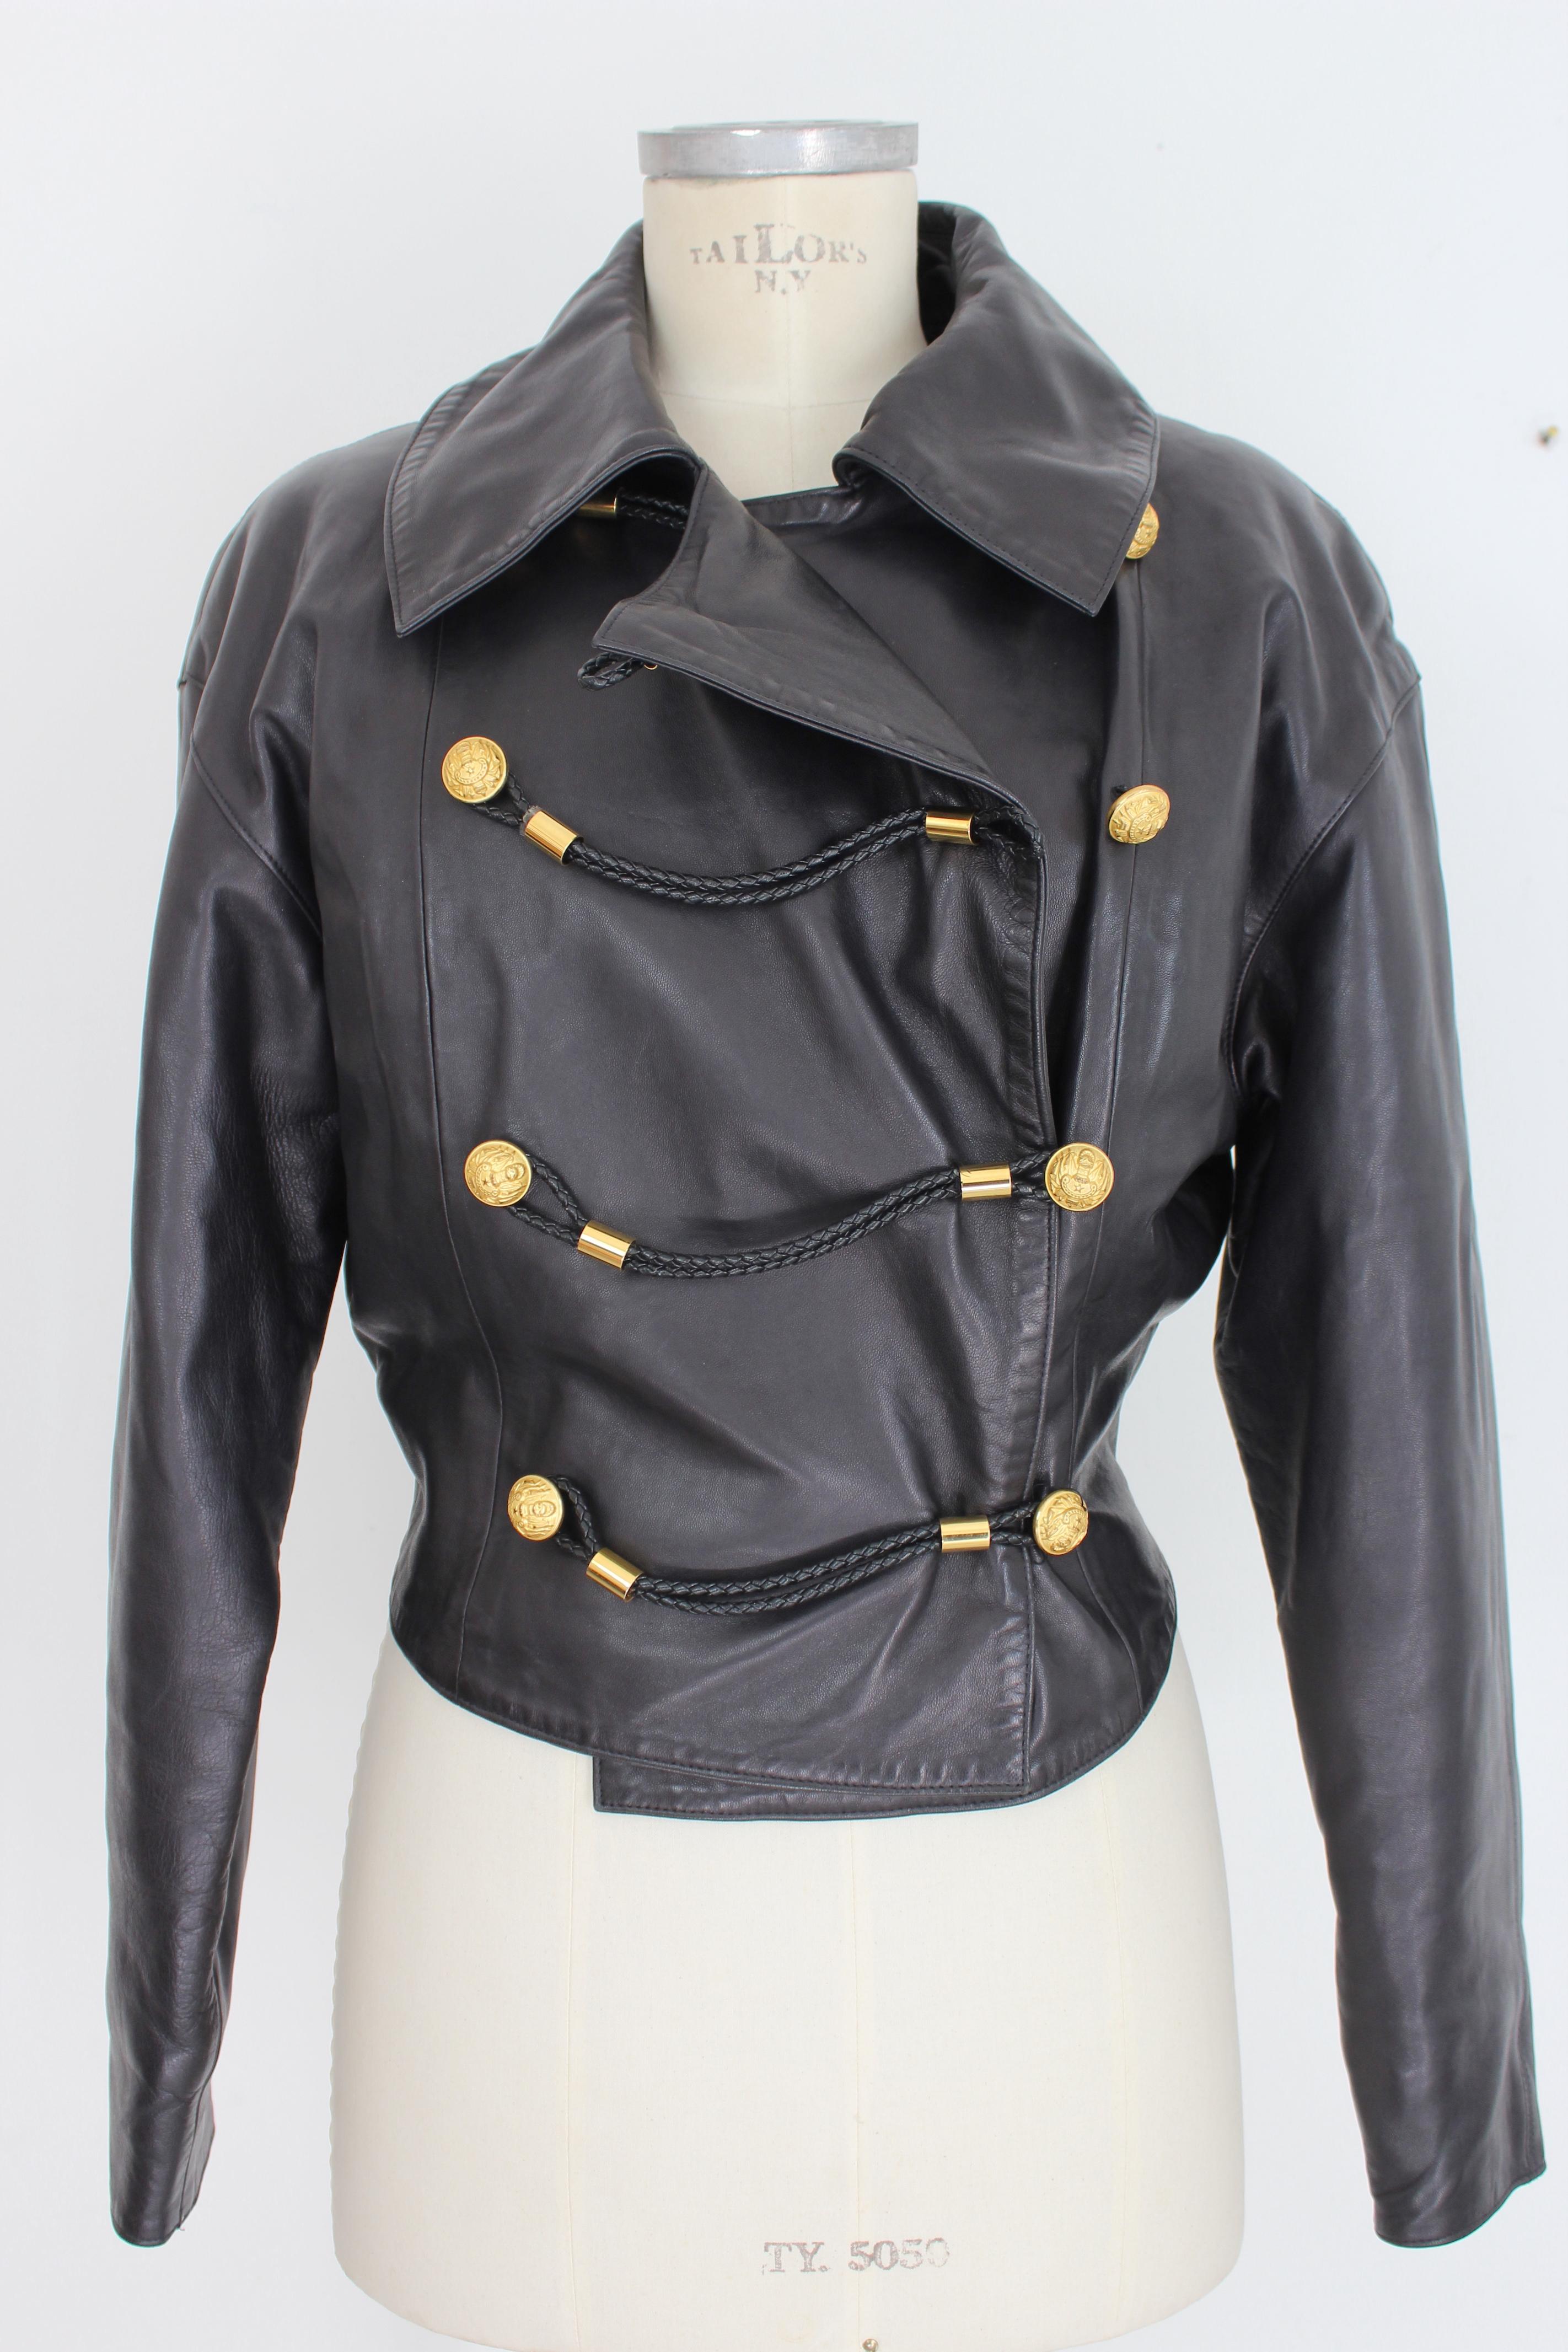 Claude Montana vintage 90s leather biker jacket. Double-breasted jacket, short at the waist in soft leather. Round shoulders with wide sleeves. Black color with gold colored buttons. Made in France.

Condition: Excellent

Item used few times, it